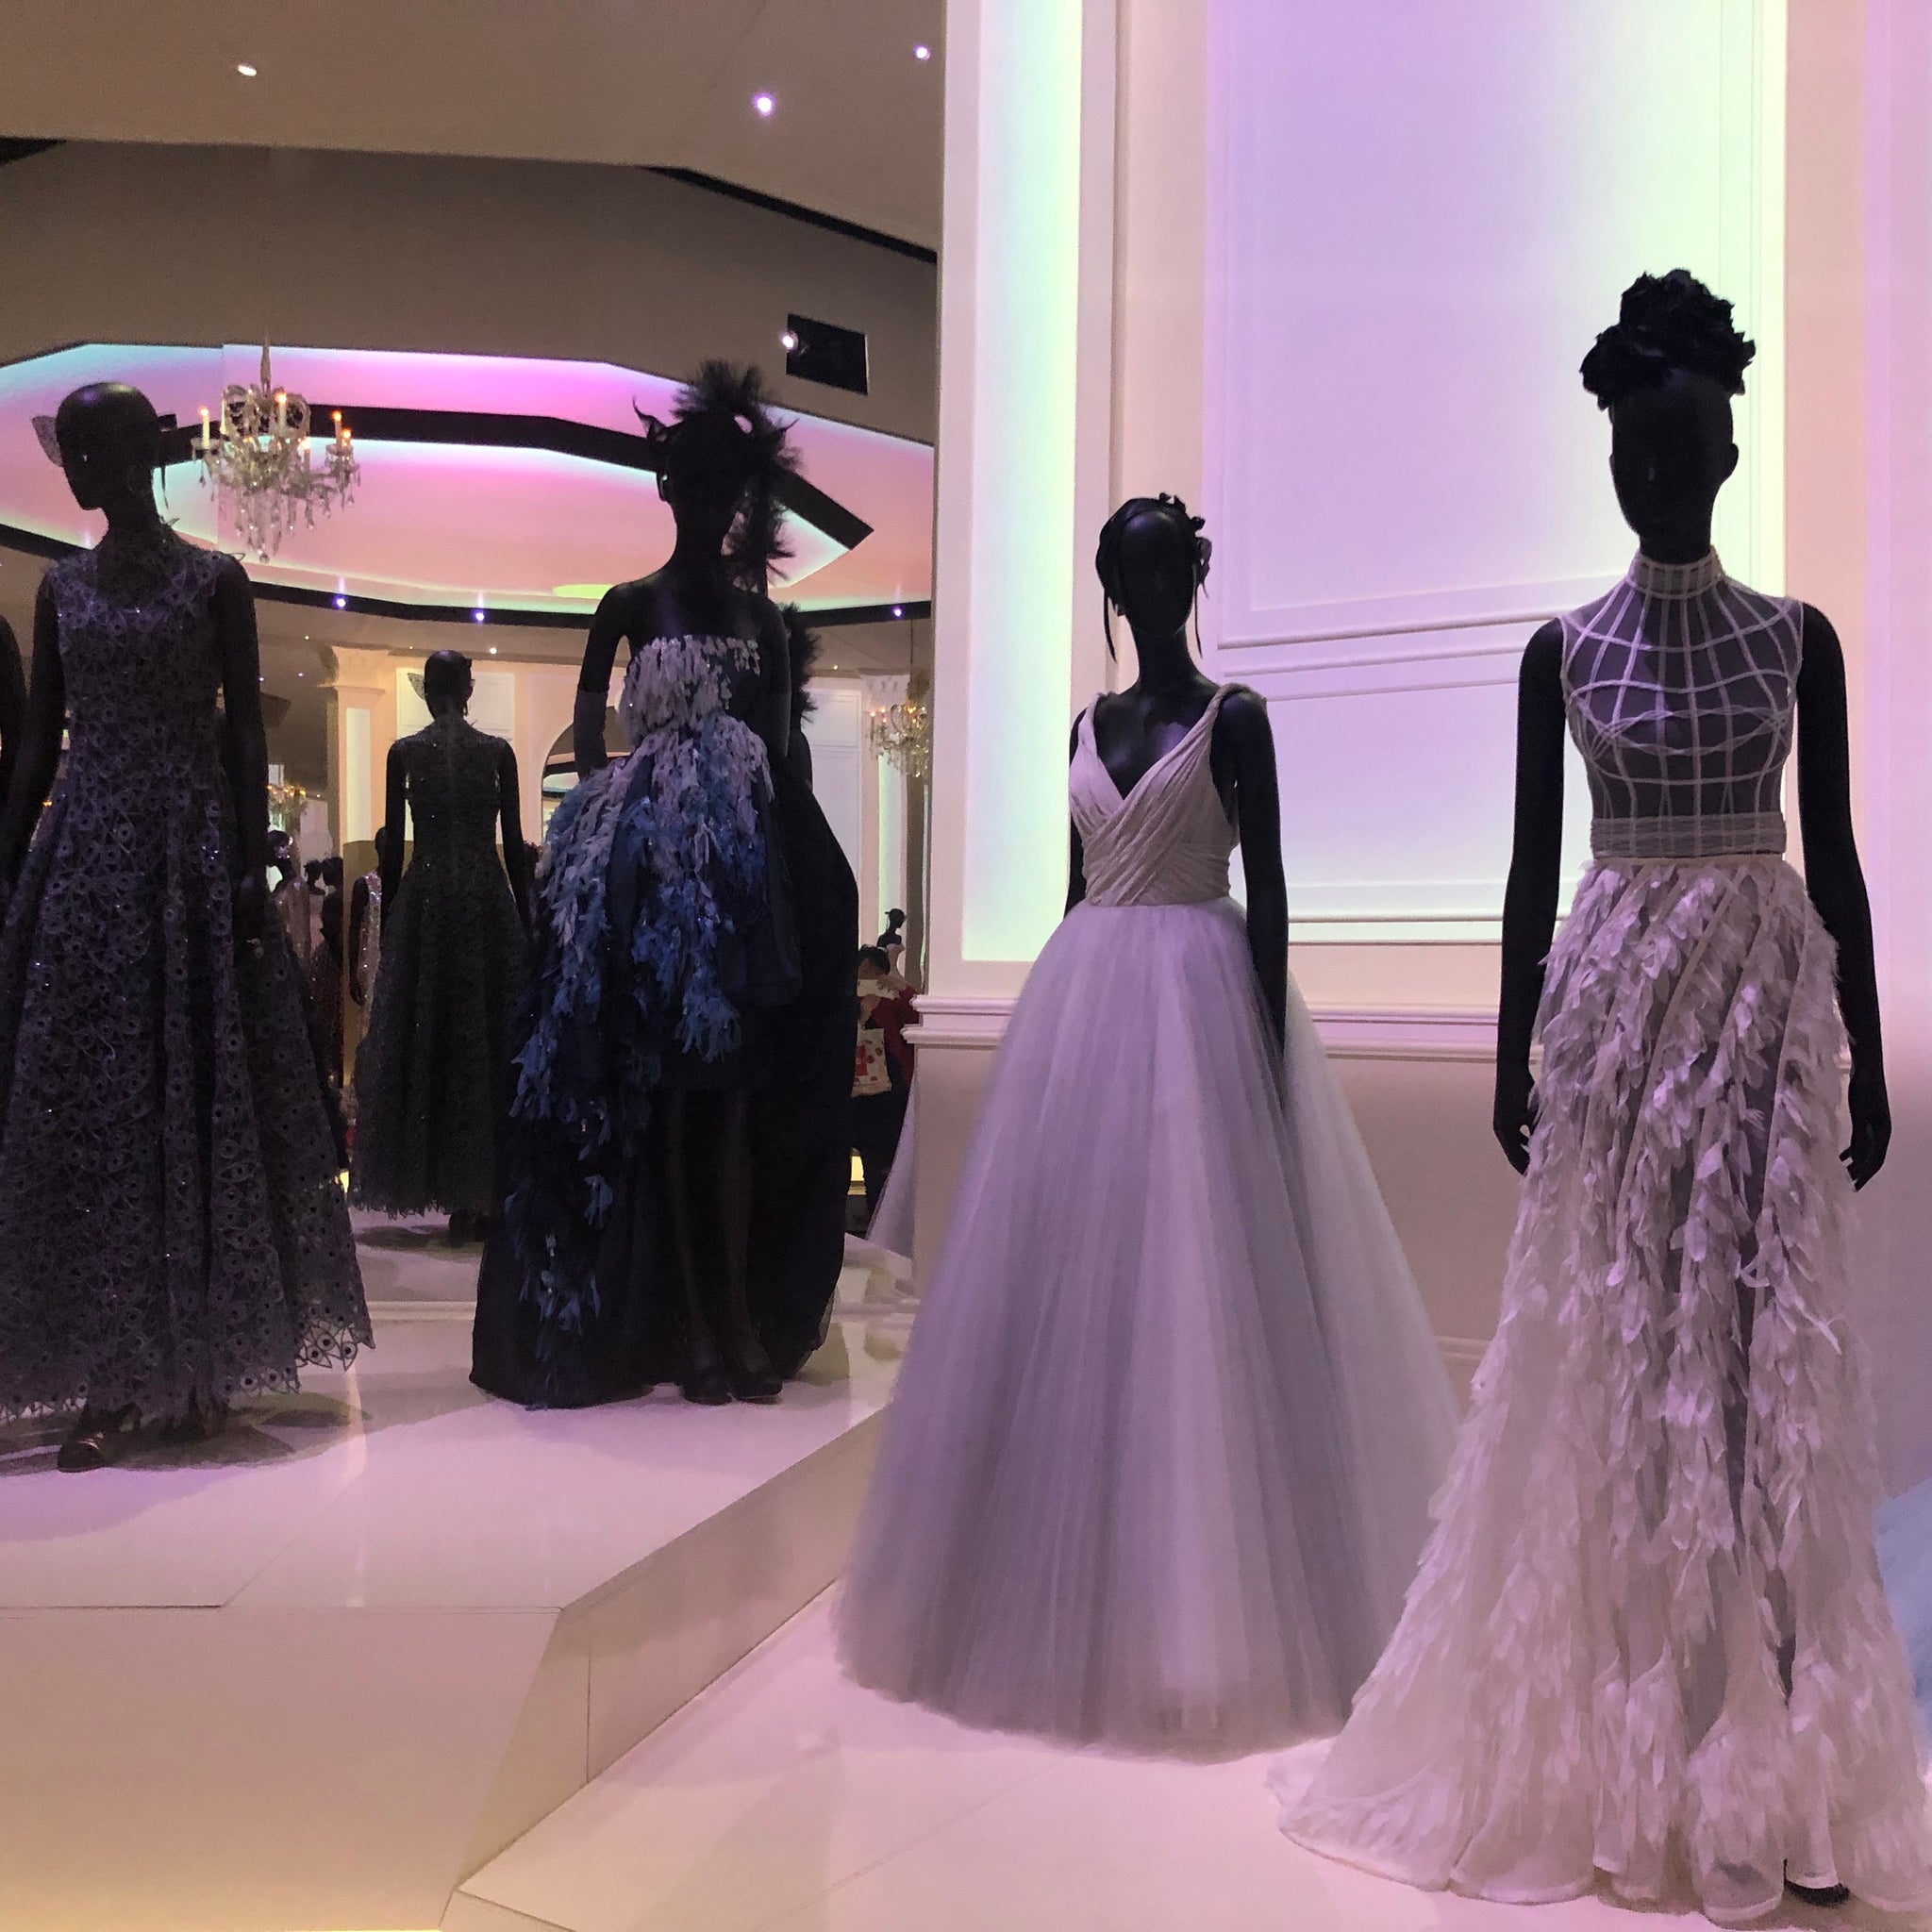 v&a opening times dior